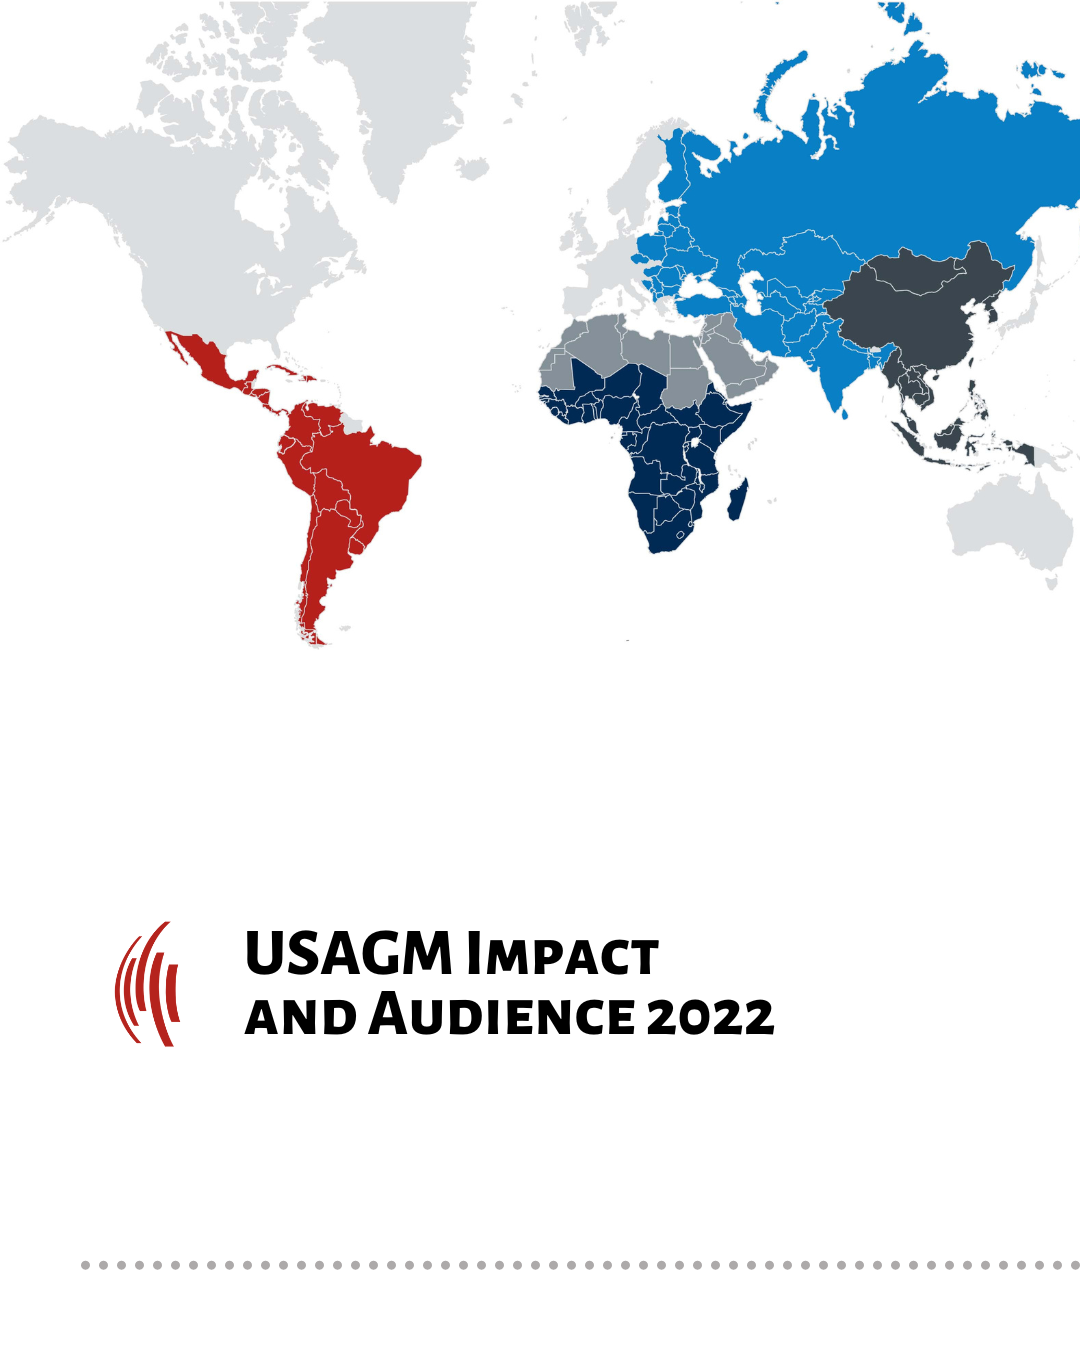 USAGM attracts record audience of 410 million